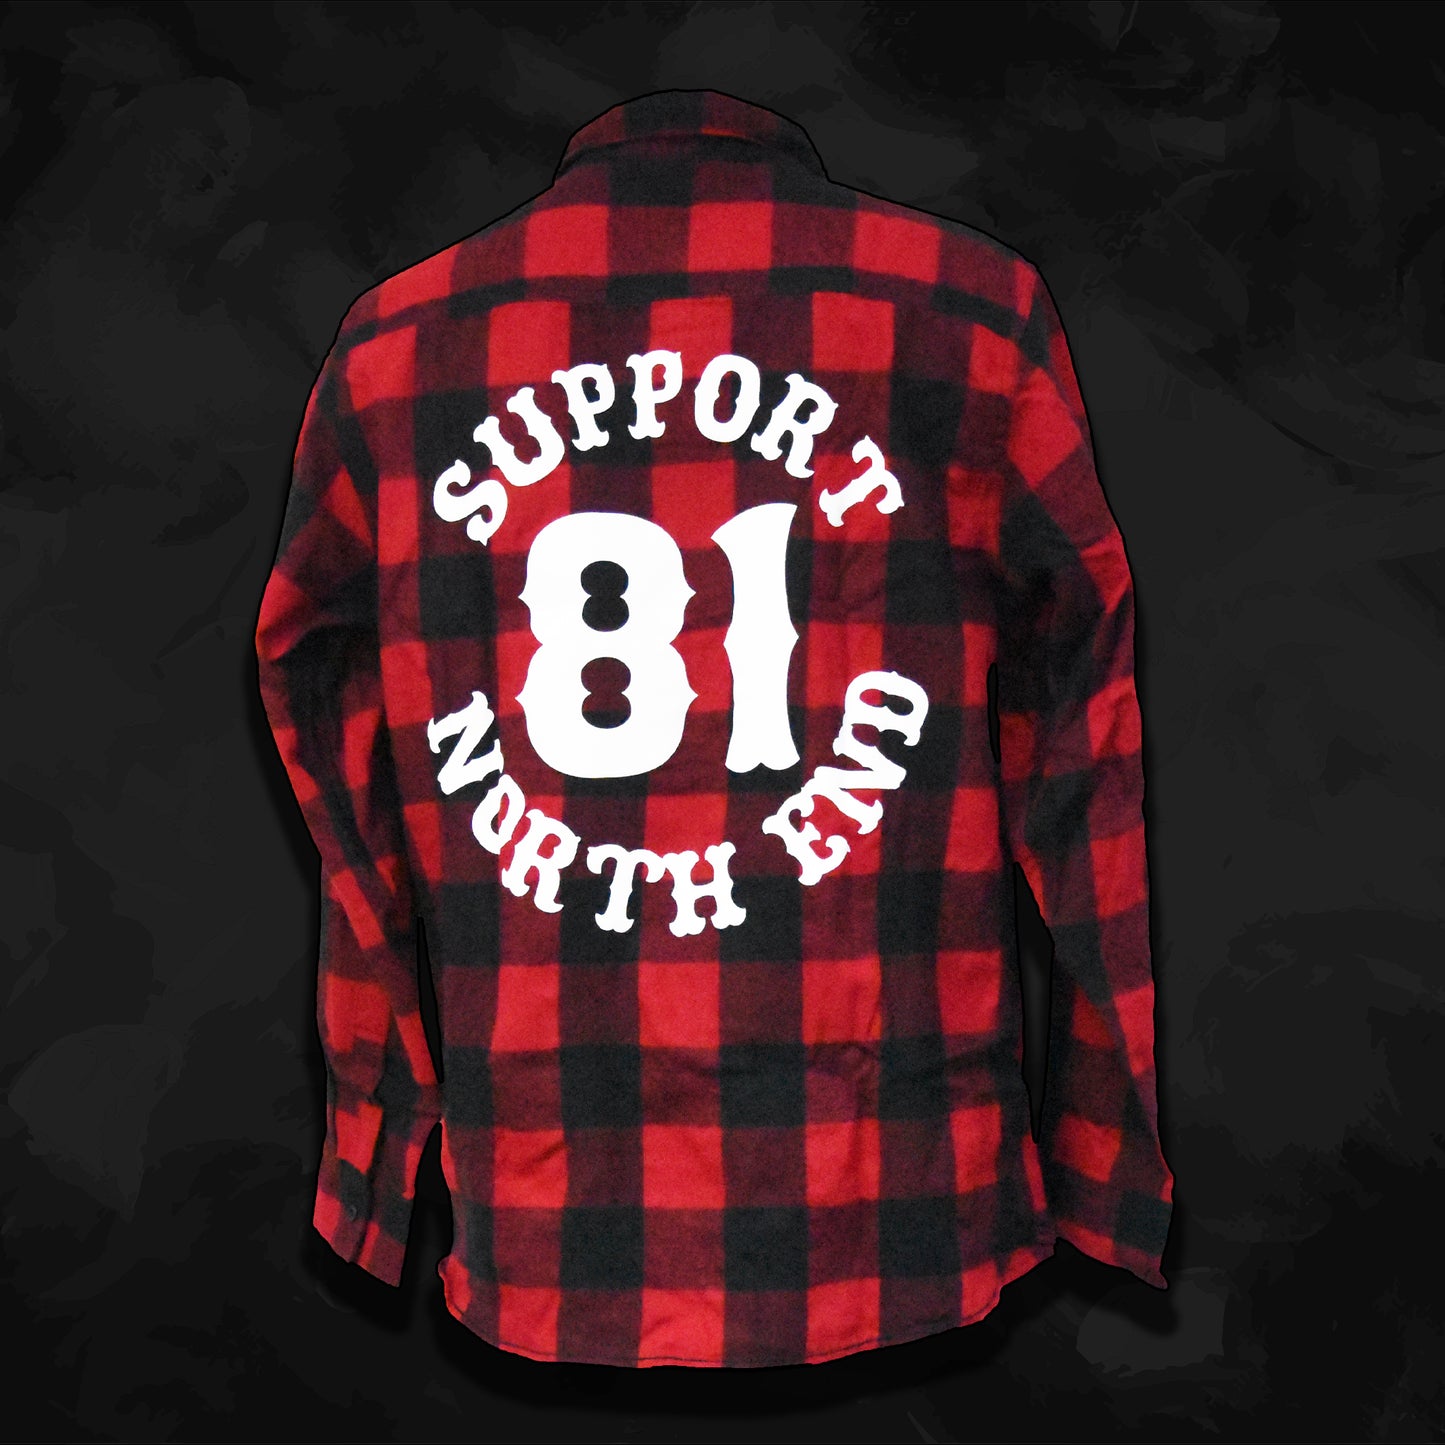 HOLZFÄLLERHEMD "SUPPORT 81 NORTH END" - UNISEX